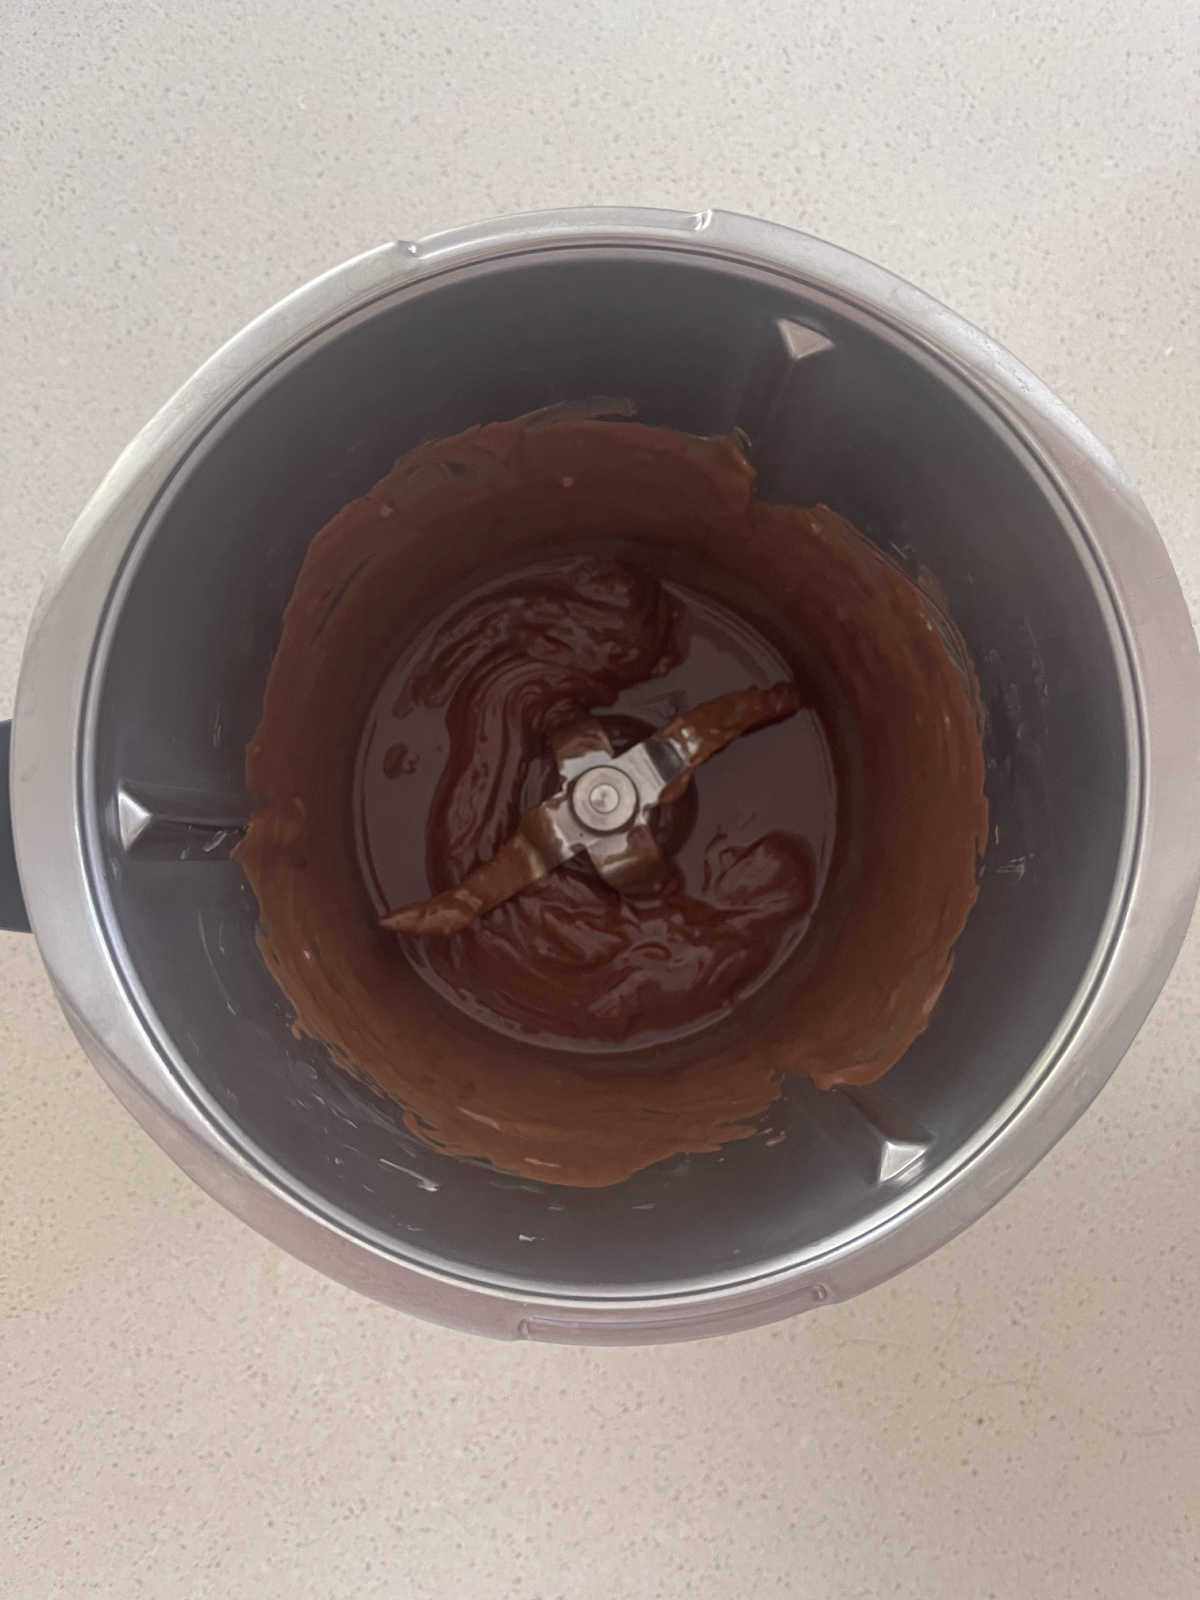 Melted chocolate and butter in a Thermomix bowl.